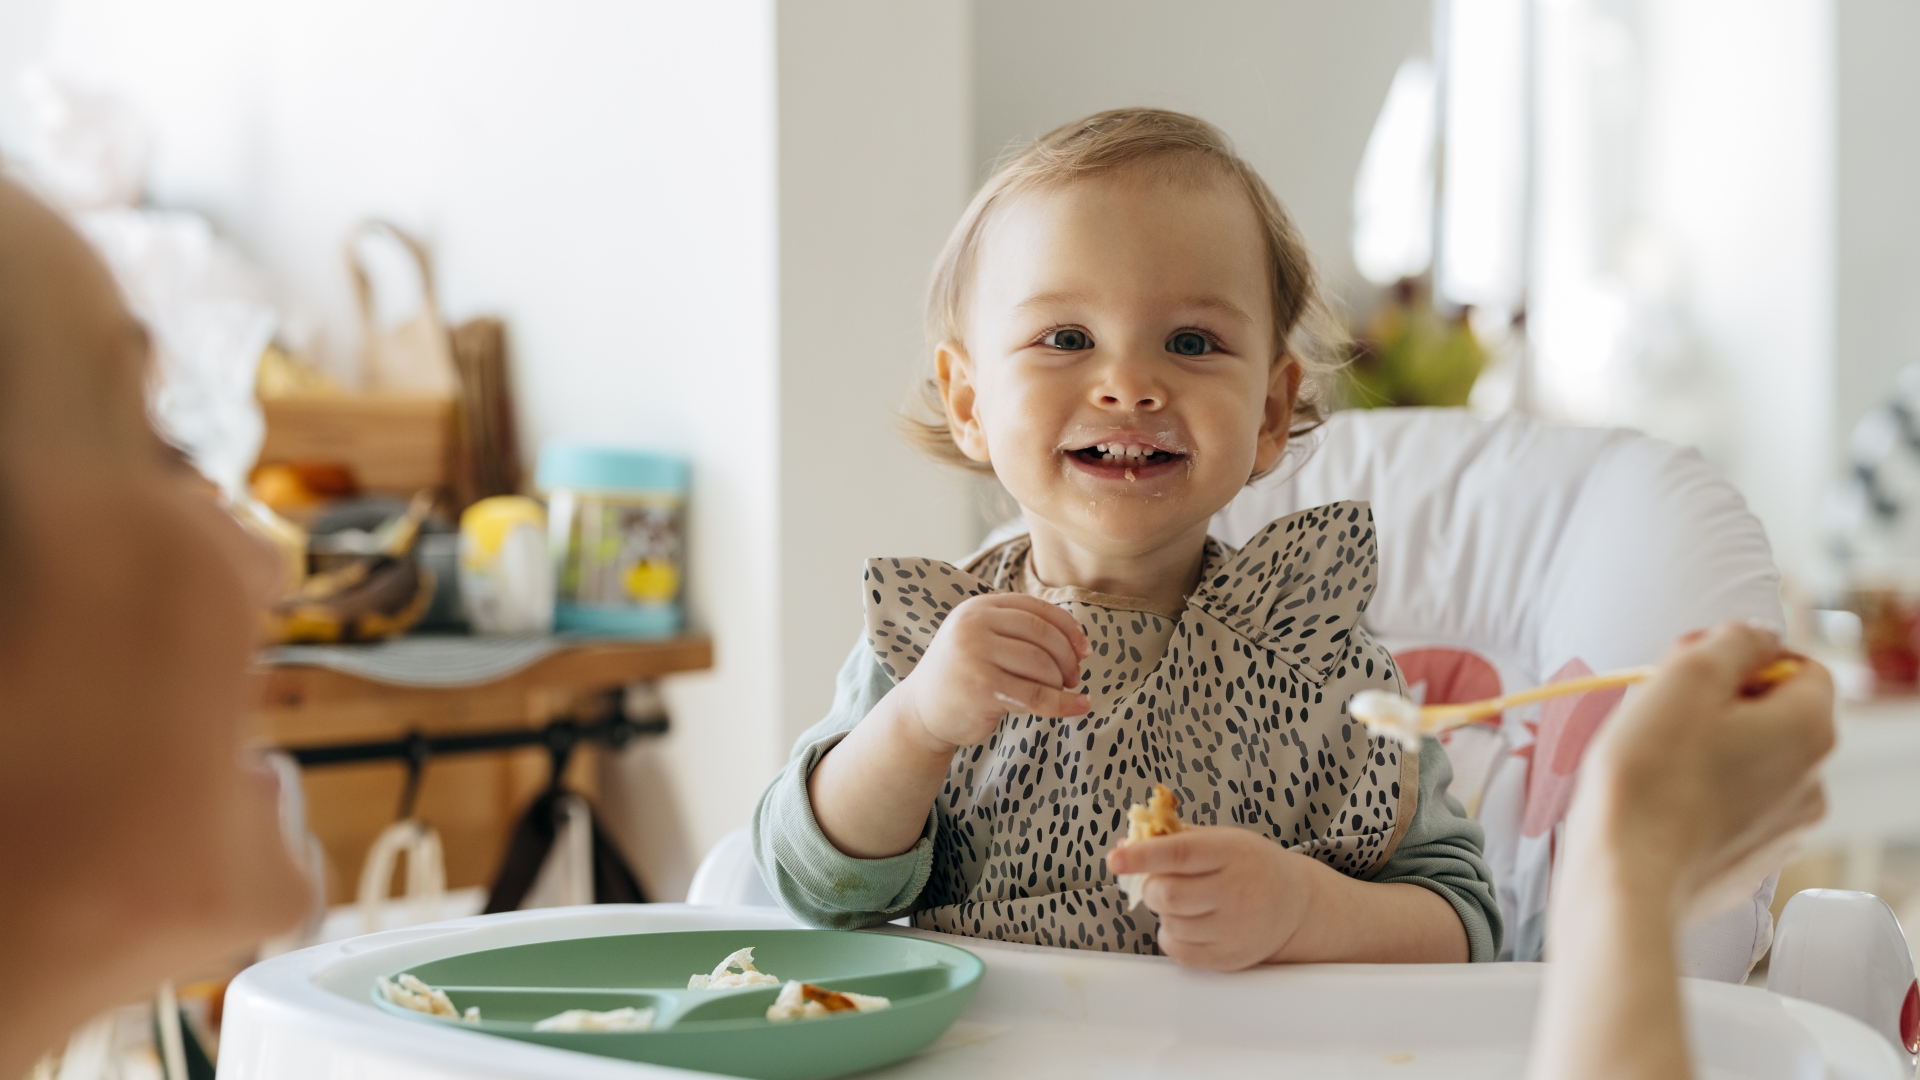 I’m a first aider – here’s the simple test EVERY parent must do when weaning their baby